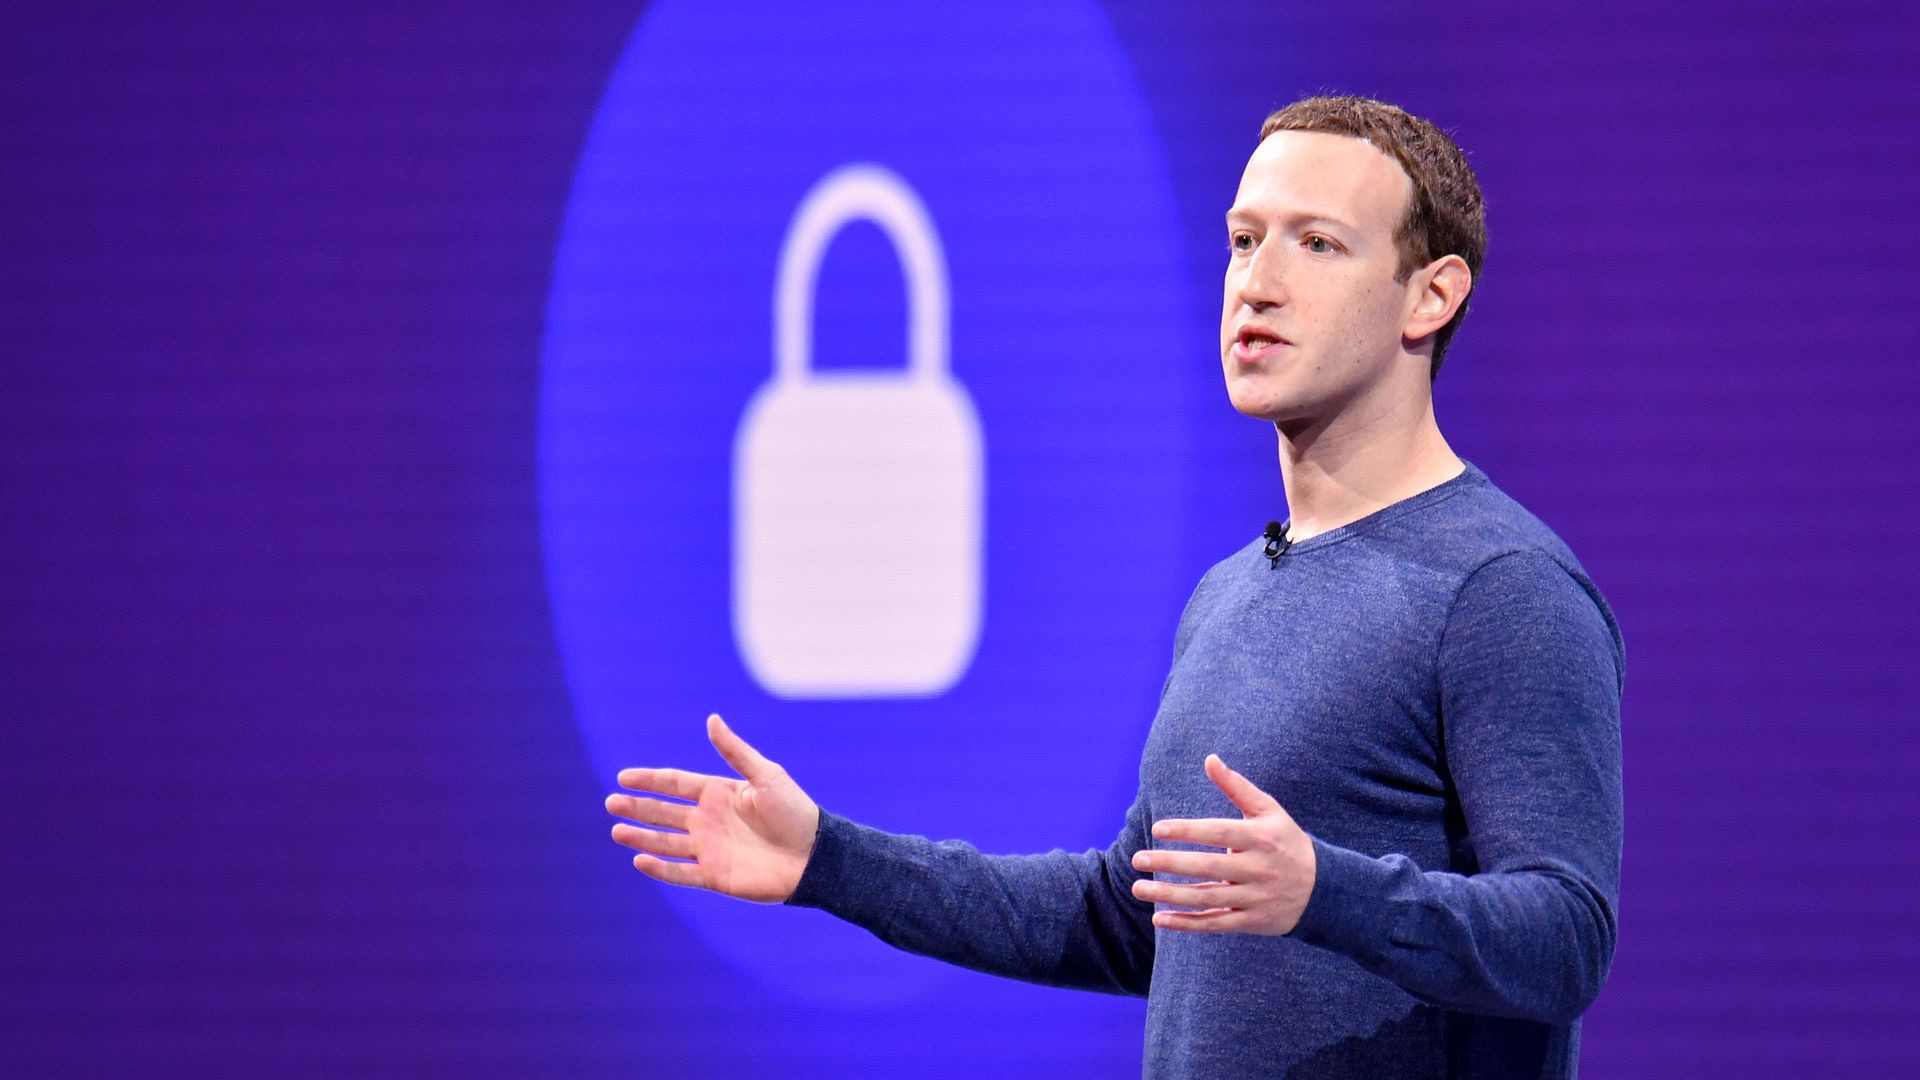 Photo of Facebook CEO Mark Zuckerberg with arms out and a lock icon projected behind him on stage